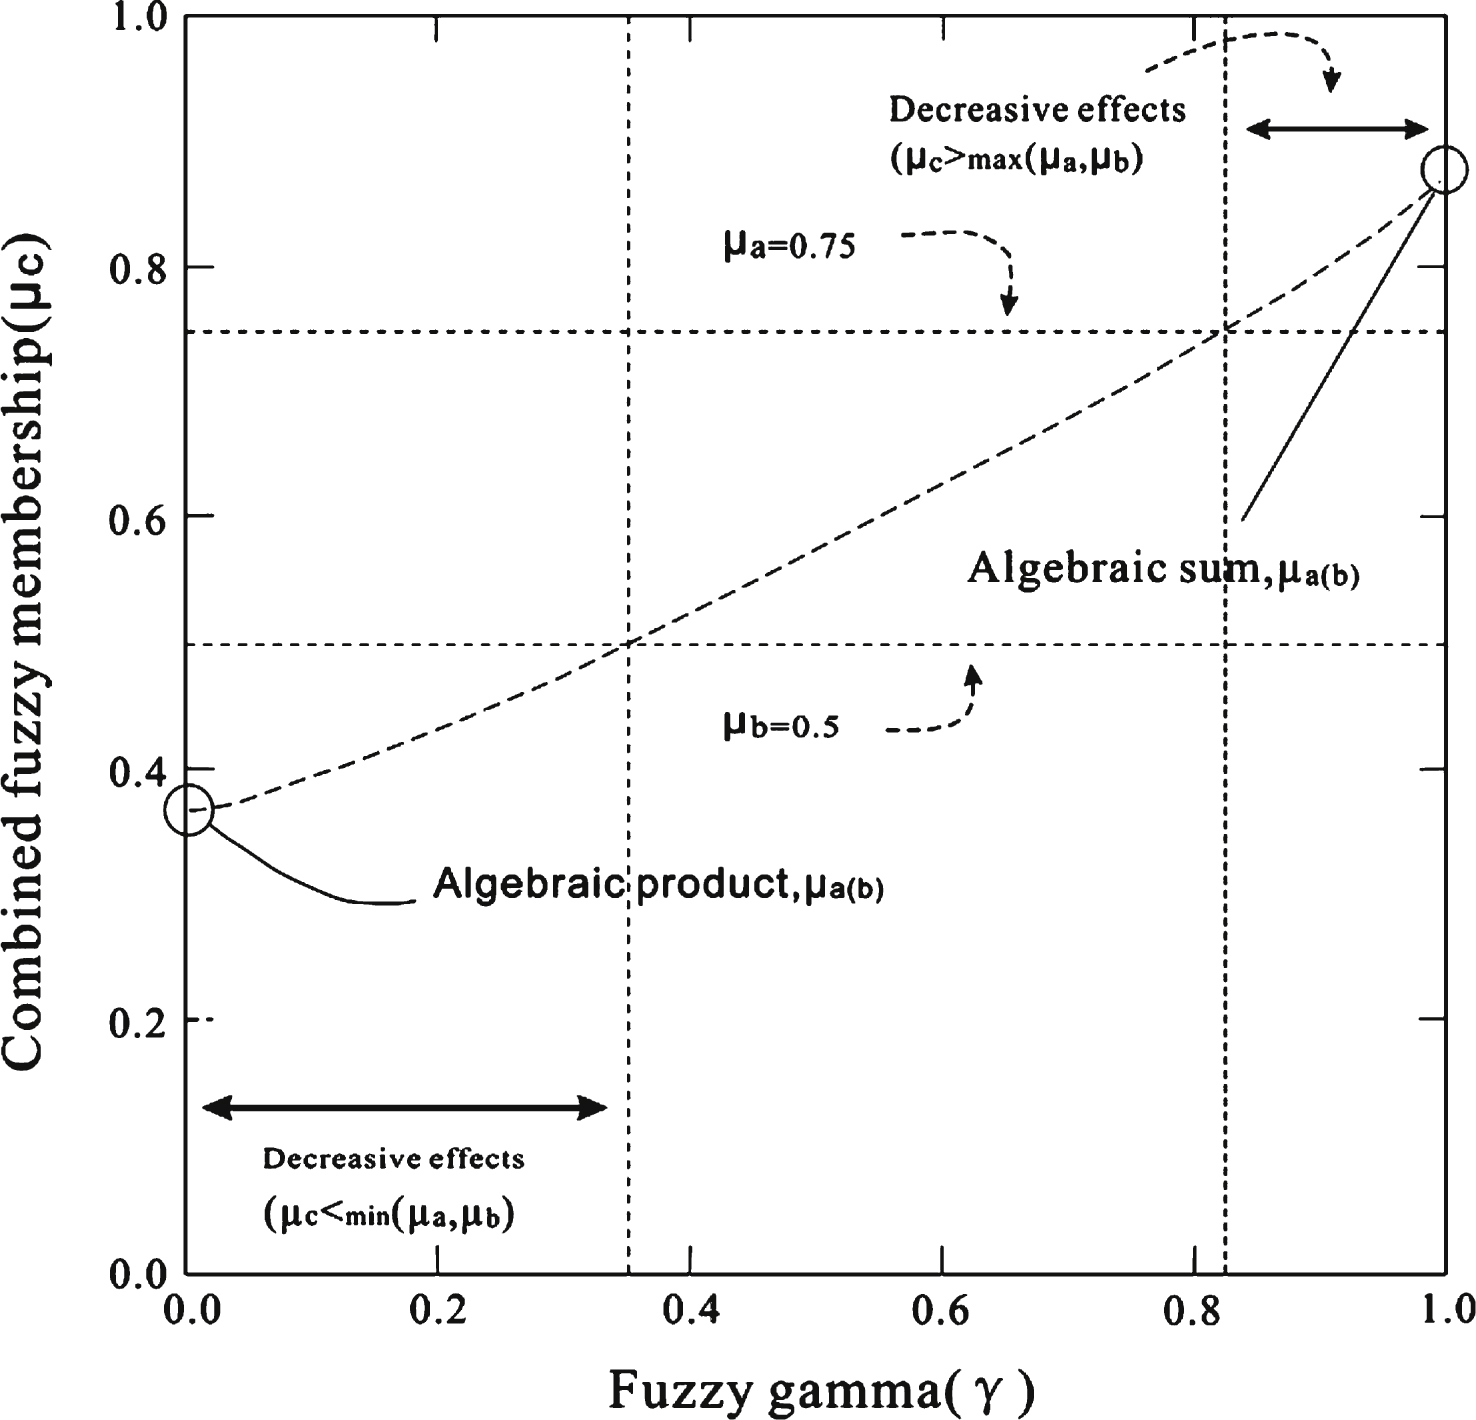 The effect of fuzzy gamma values (γ) on combining fuzzy memberships μ

a
 and μ

b
 to determine combined fuzzy membership μ

c
 [18].